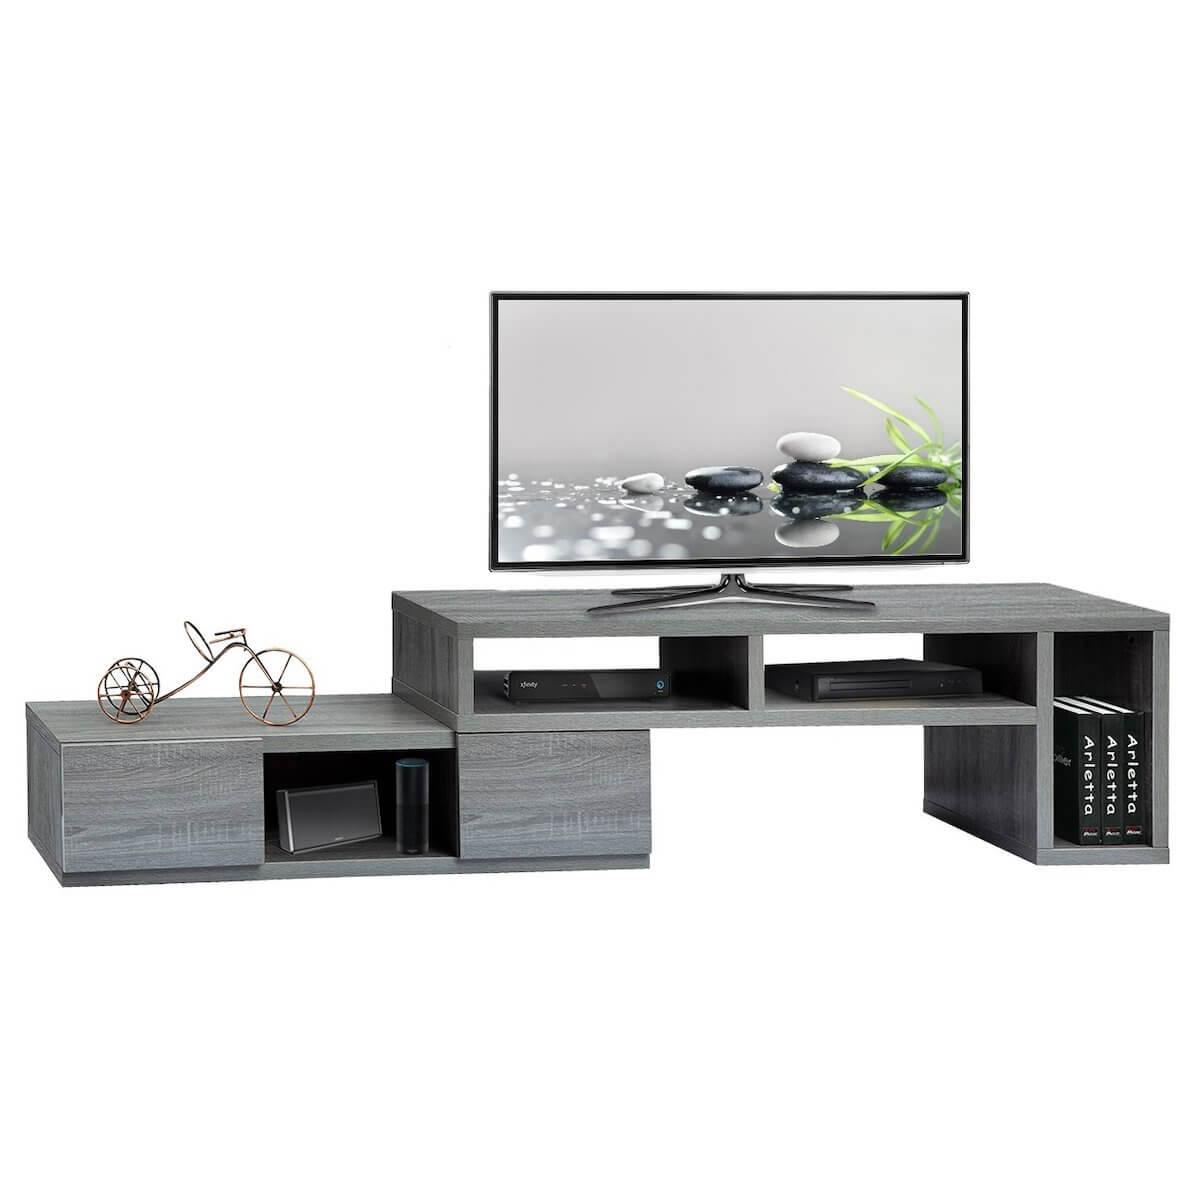 Techni Mobili Adjustable TV Stand Console for TVs Up to 65" RTA-7050-GRY Expanded with TV